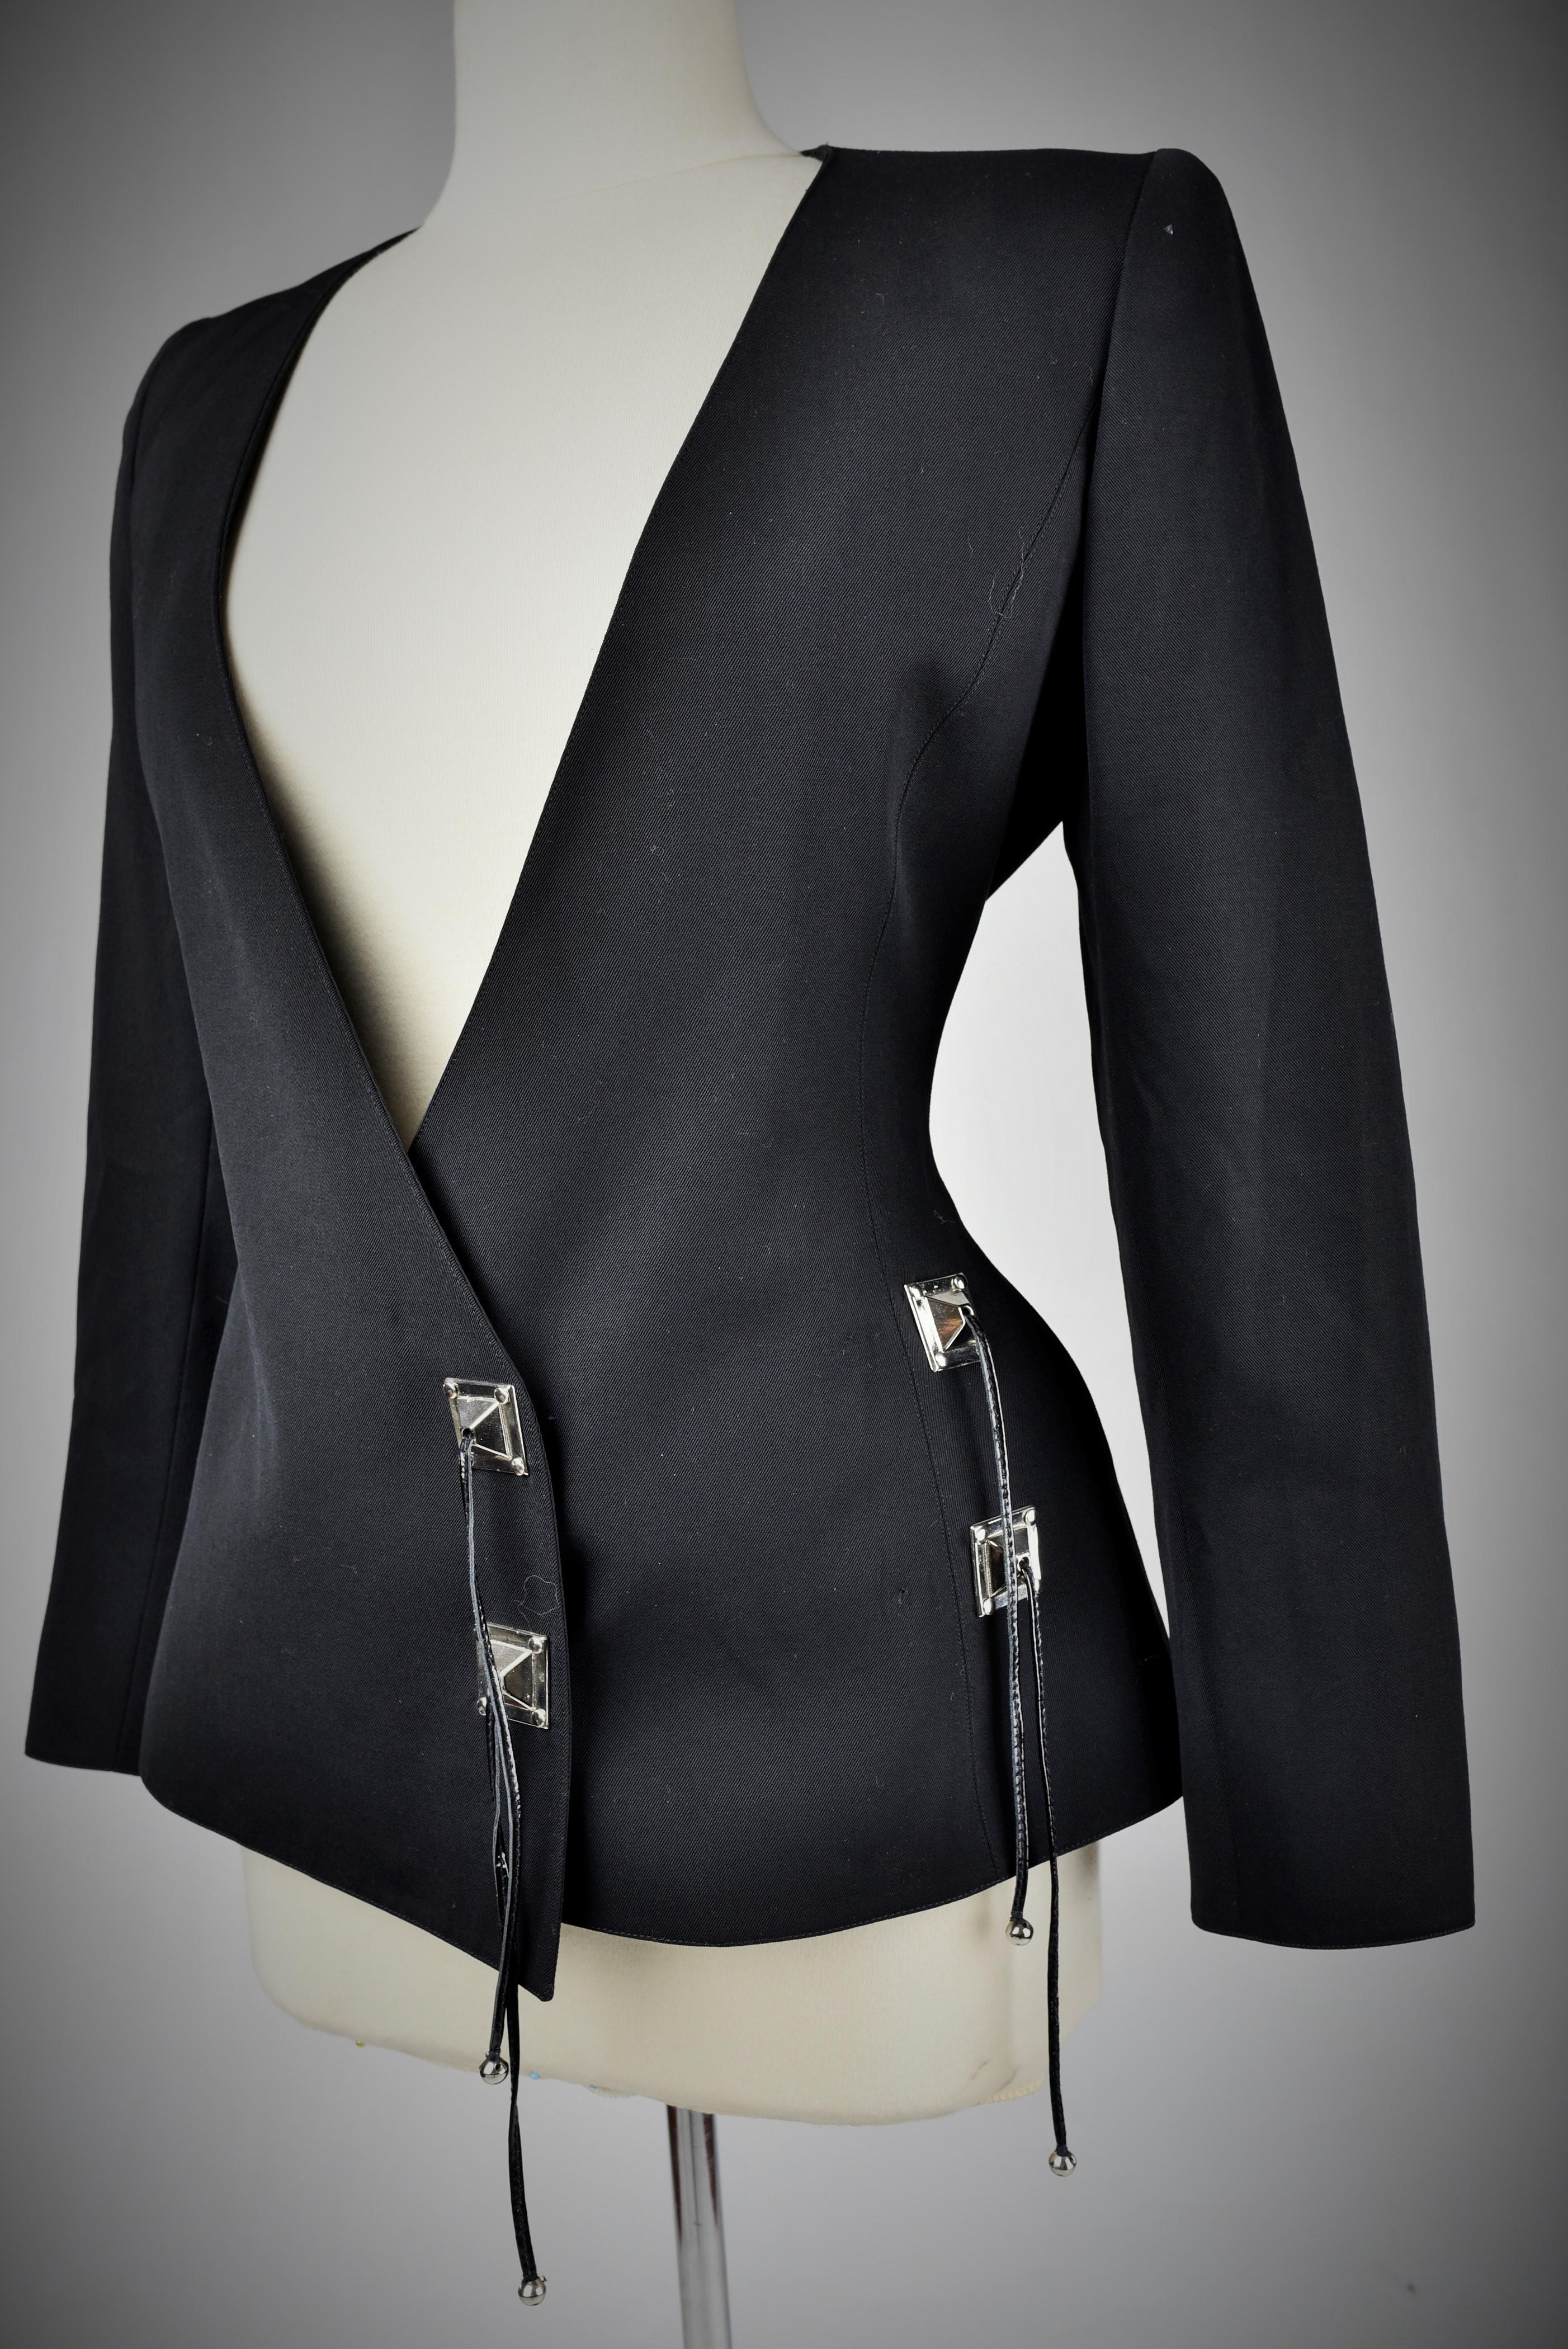 Black Tergal Tuxedo Jacket by Claude Montana Circa 1990 In Good Condition For Sale In Toulon, FR